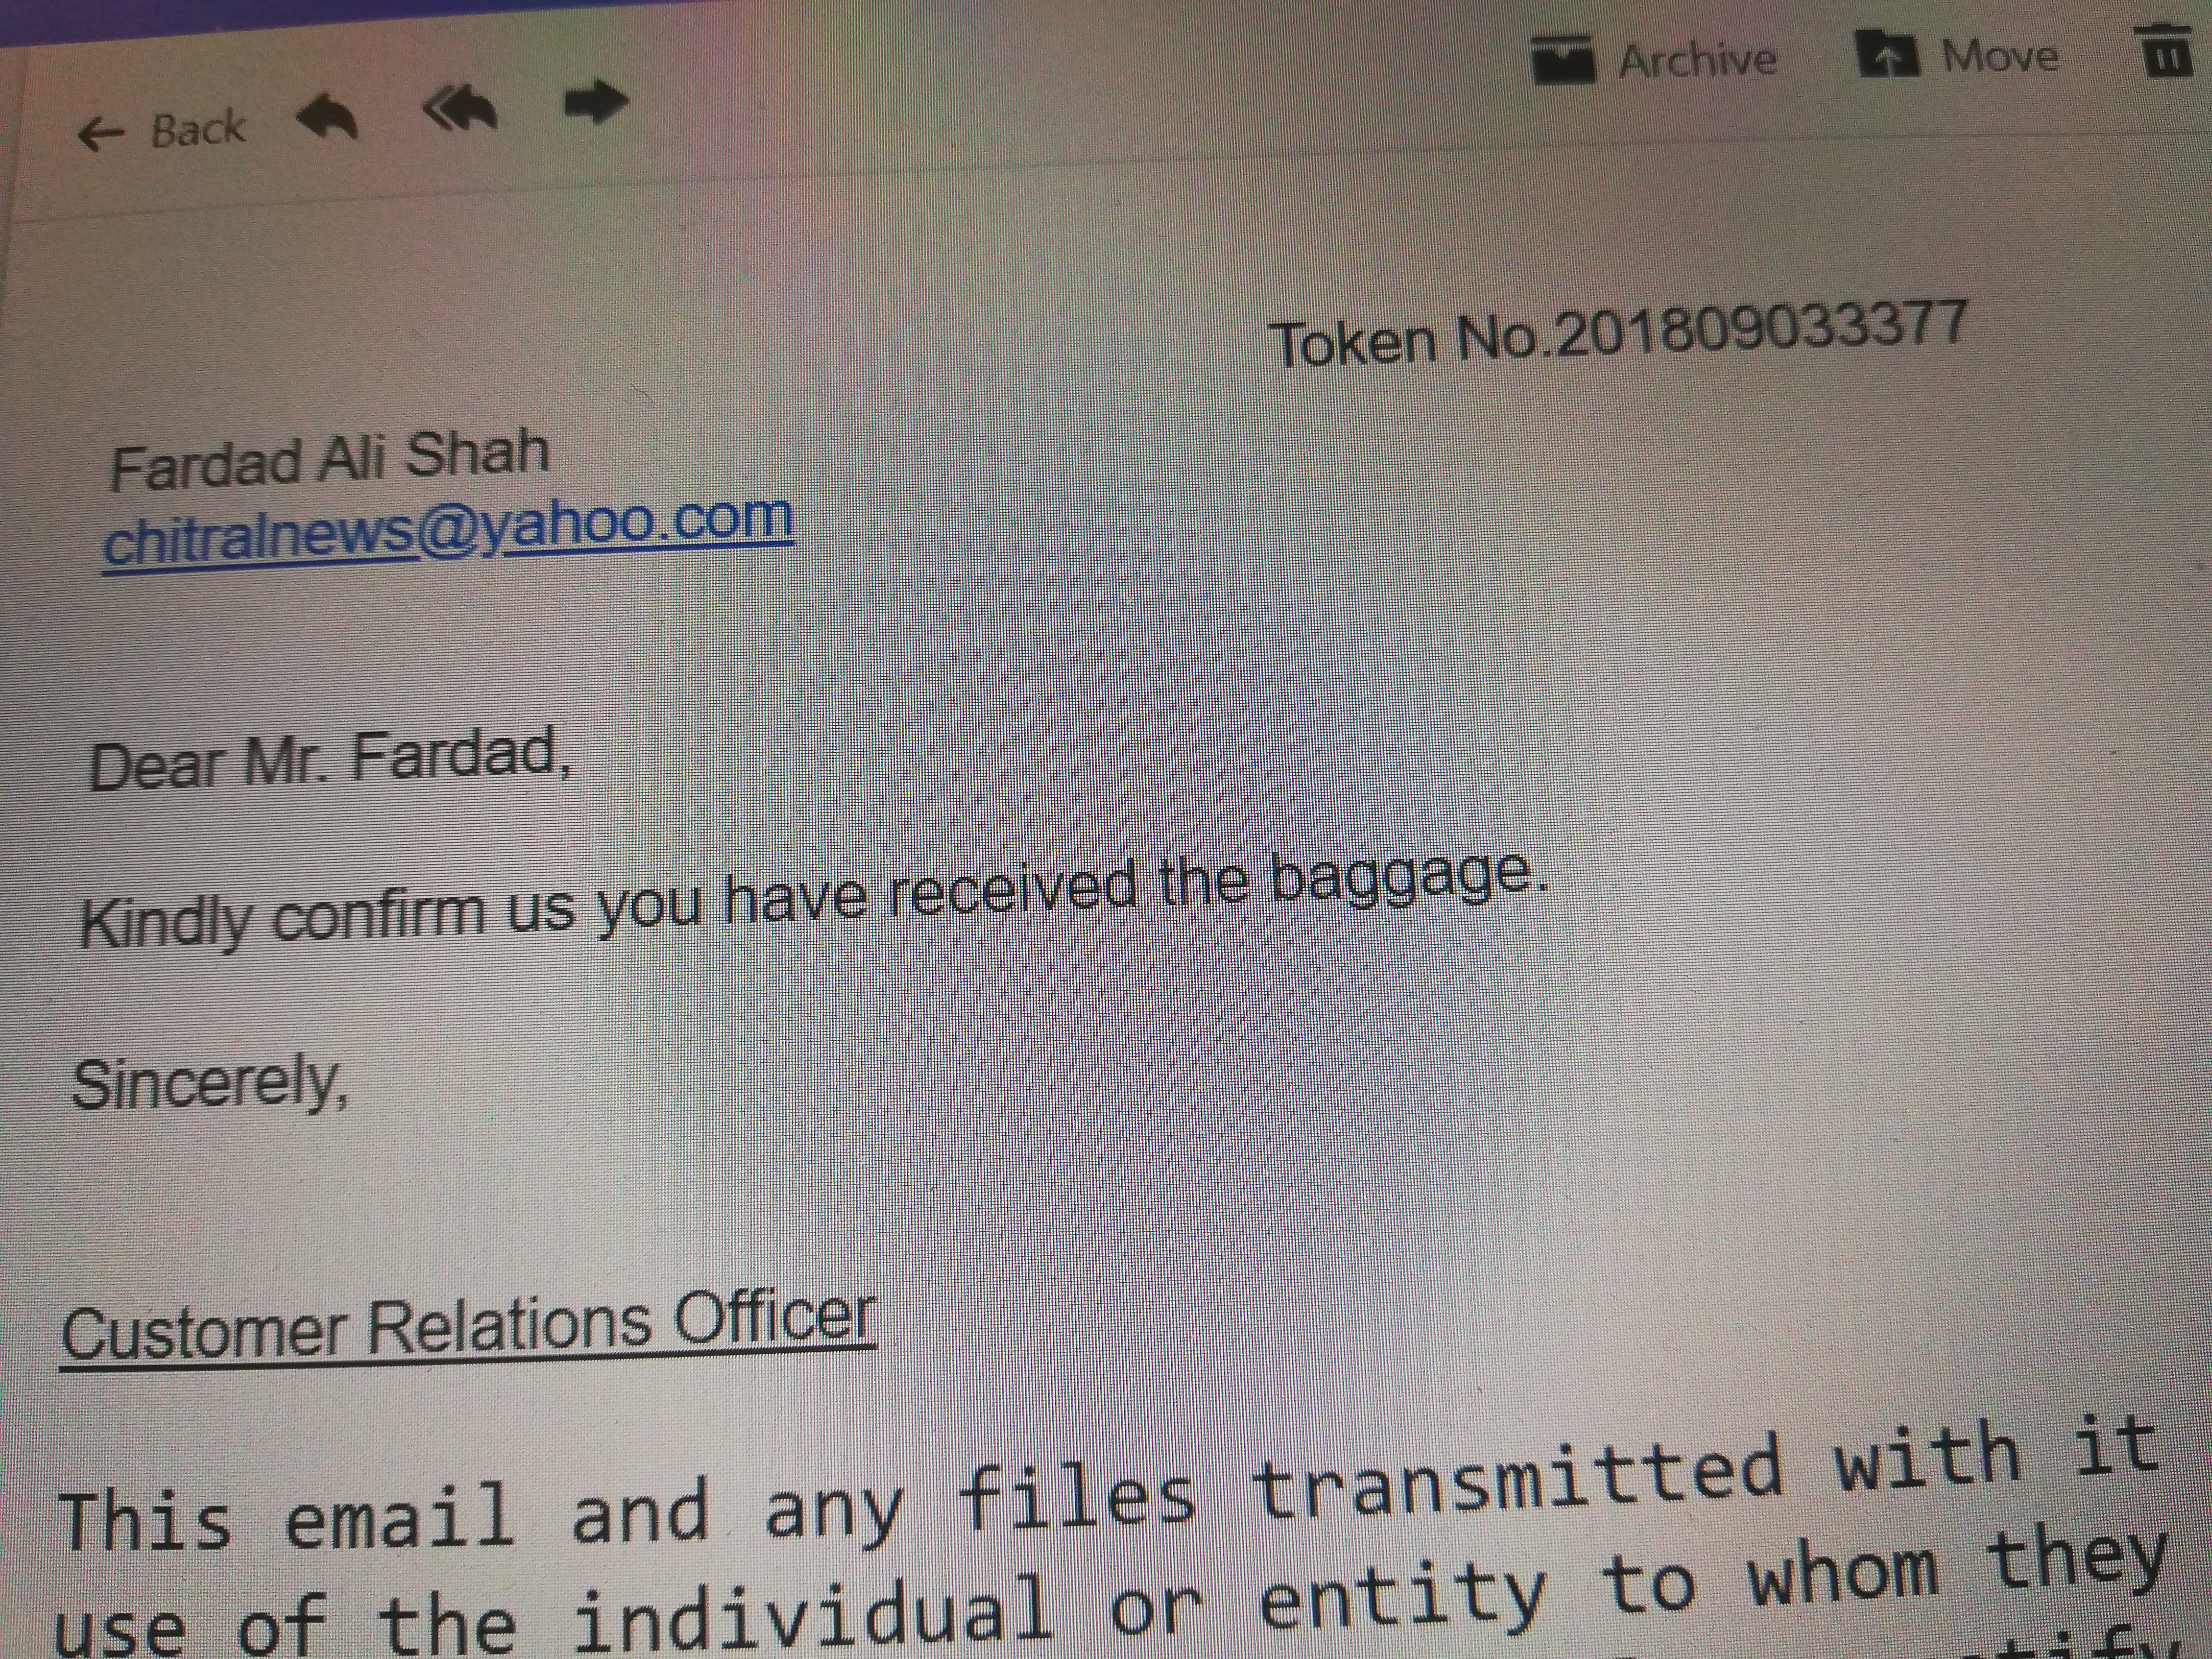 Email sent by PIA - Chitral News